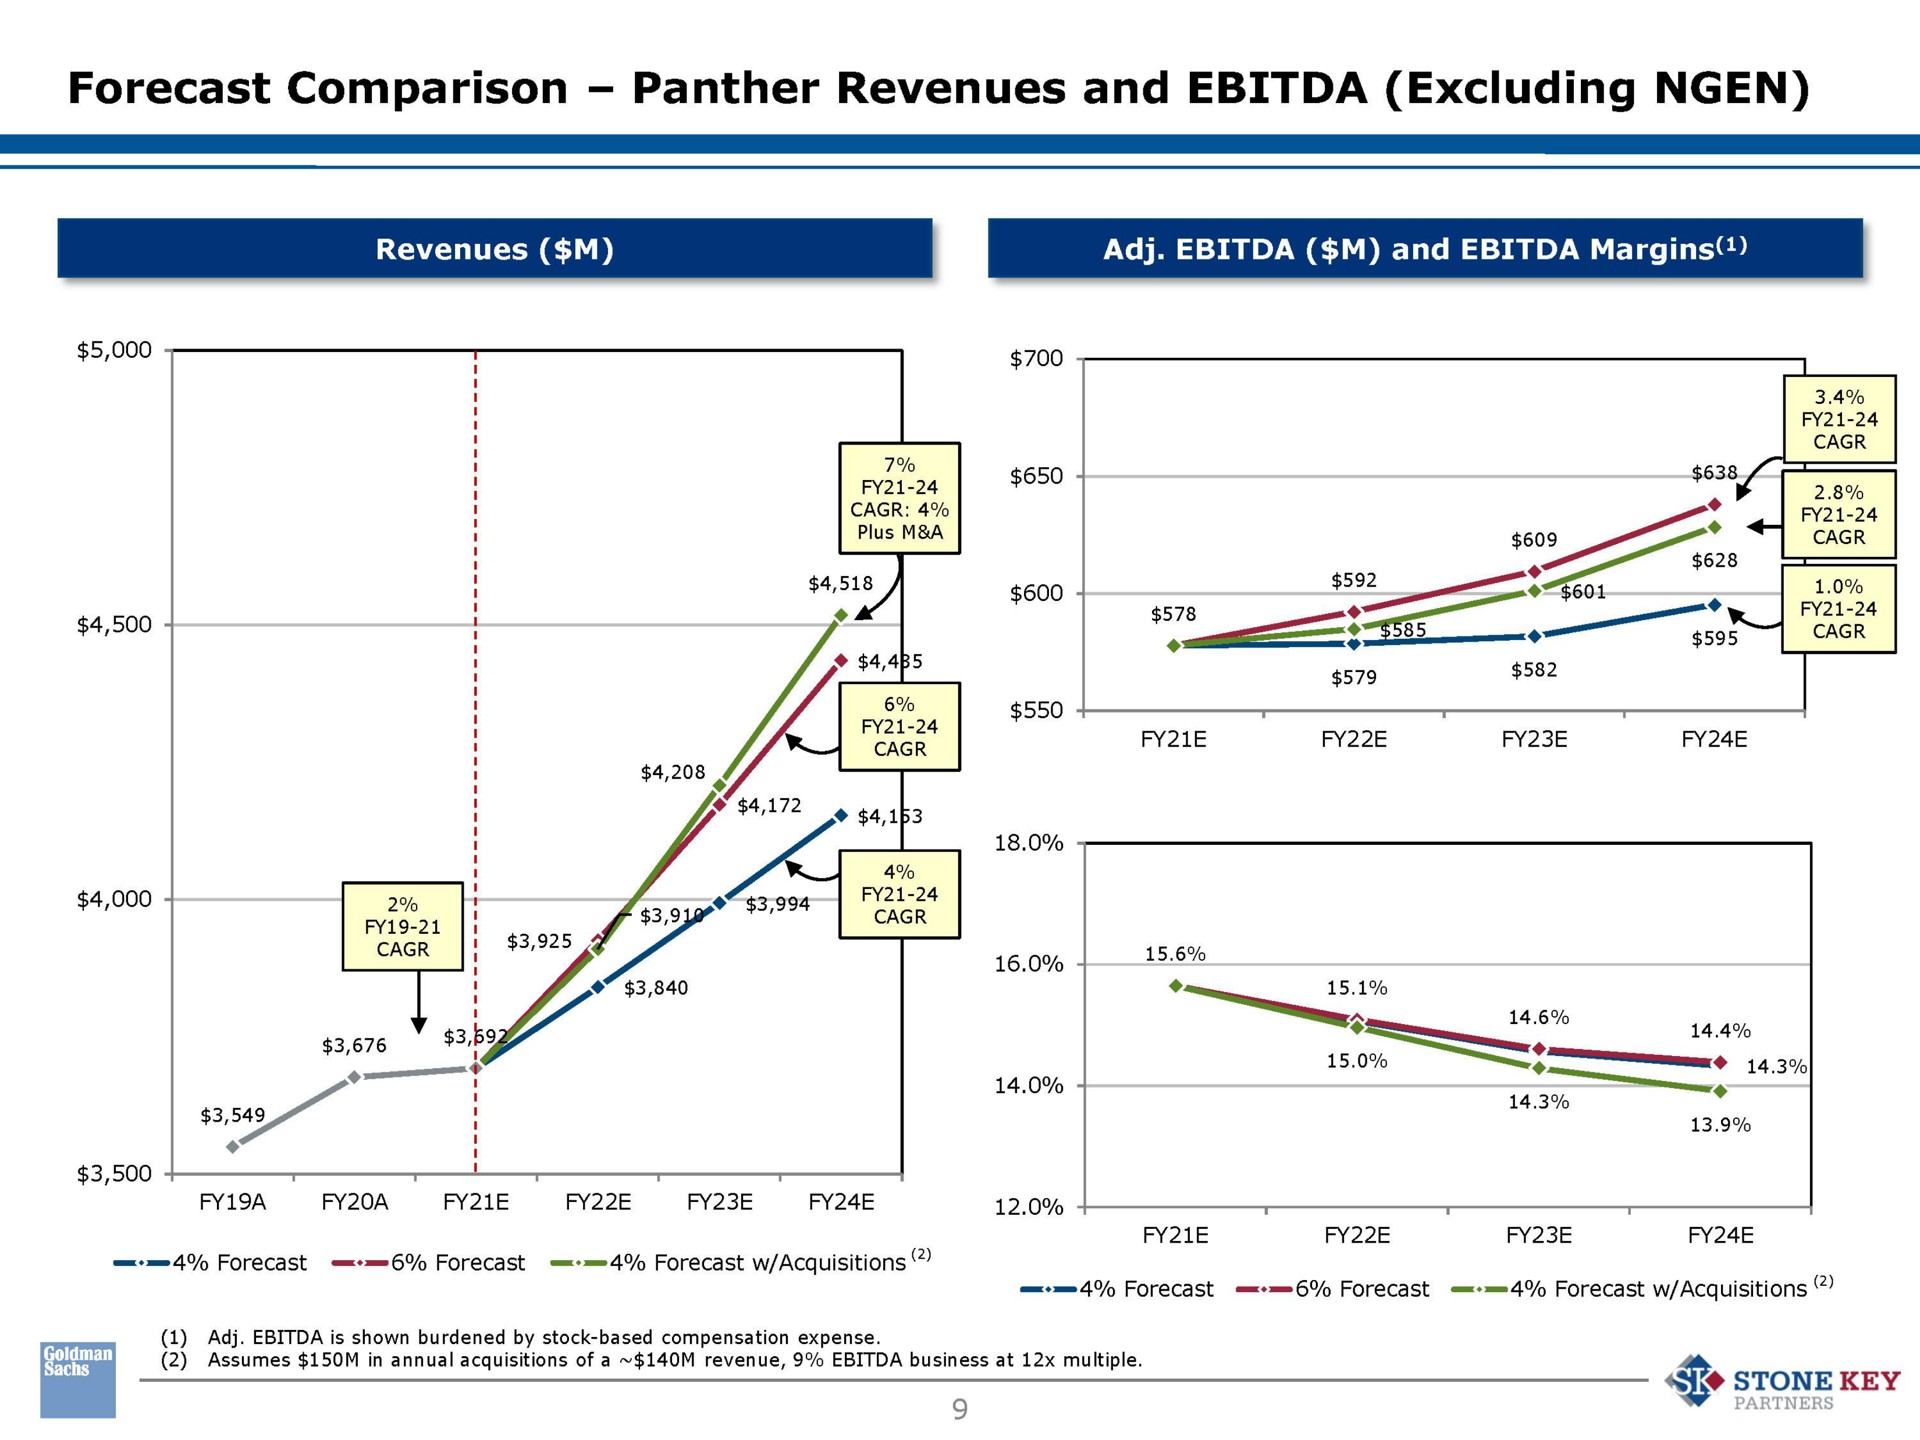 forecast comparison panther revenues and excluding revenues and margins | Perspecta